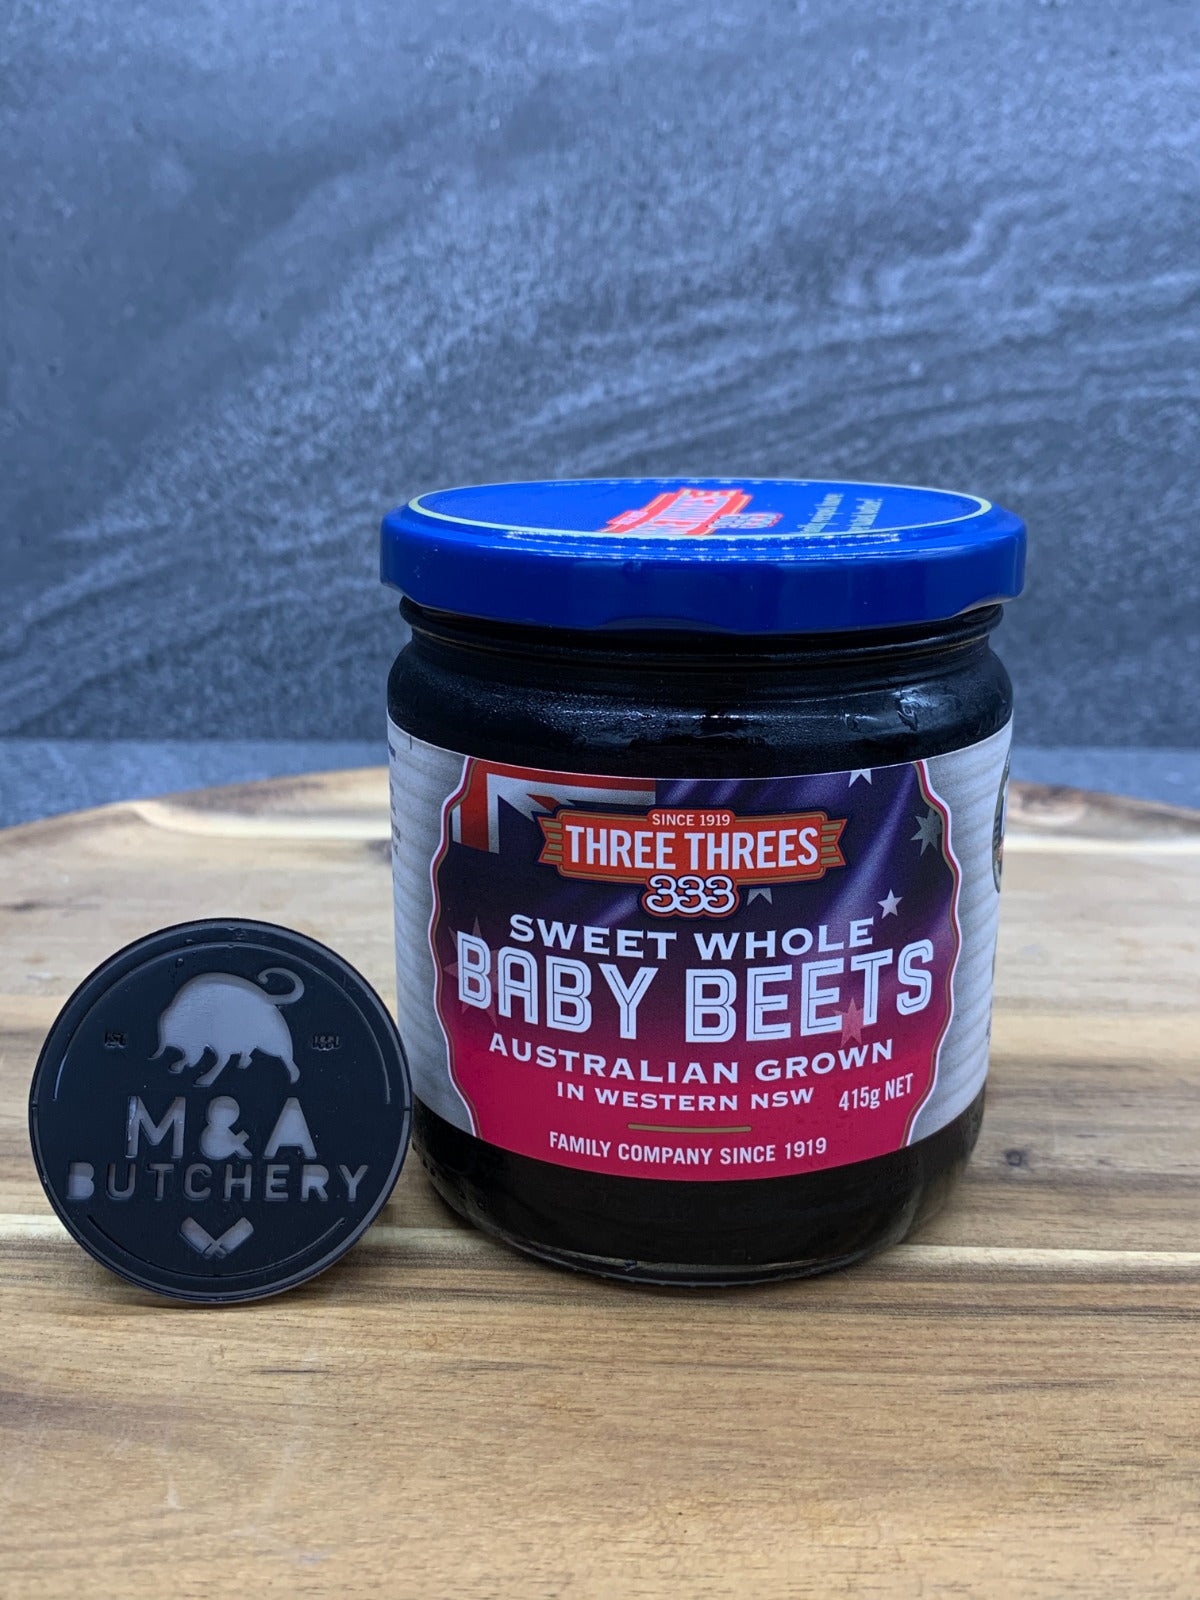 333's Sweet Whole Baby Beets